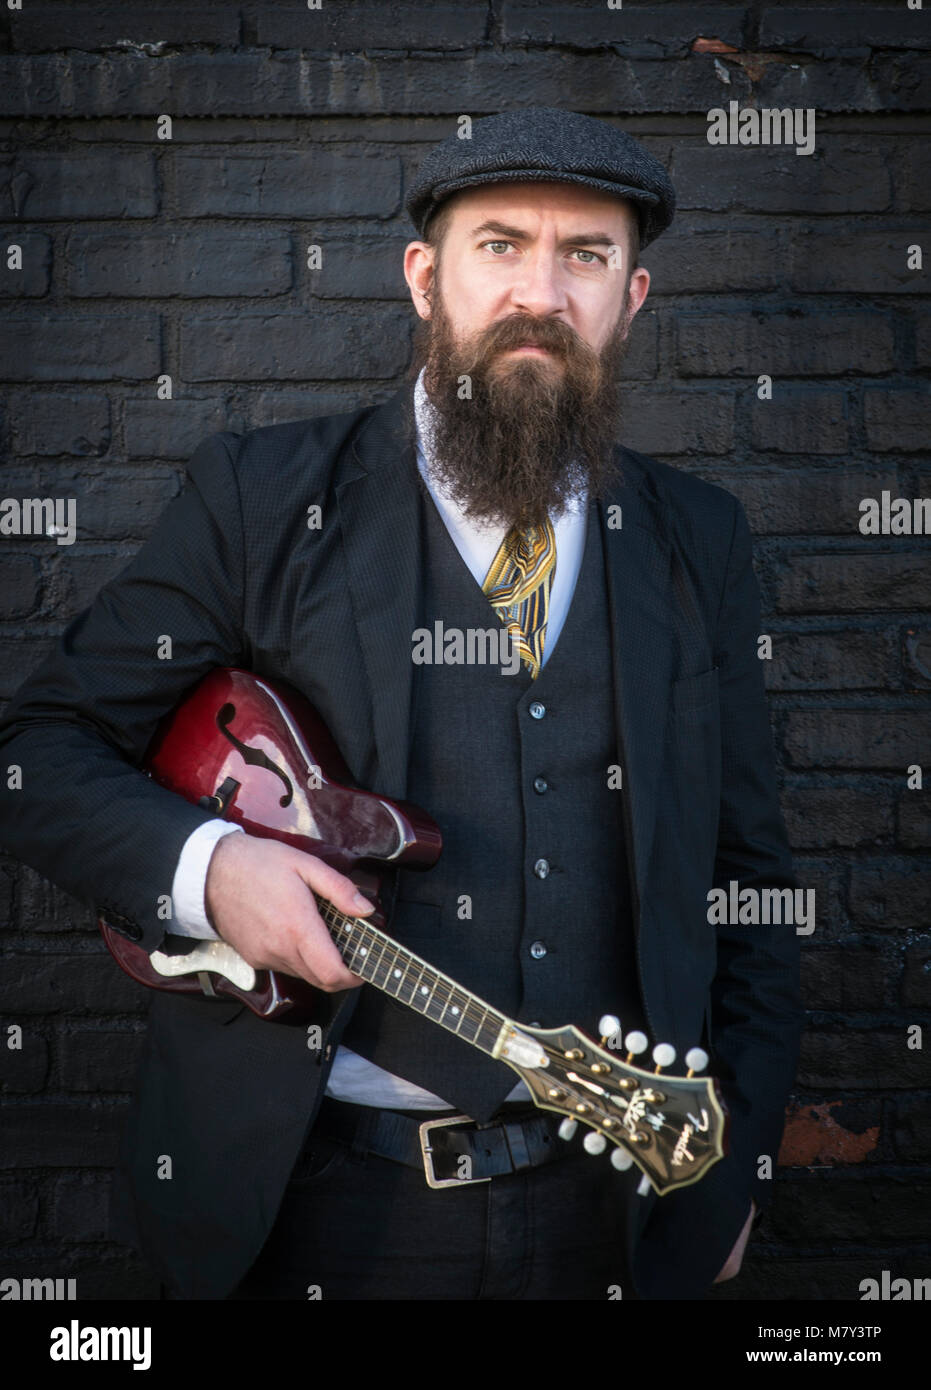 A bearded man standing with a mandolin. Stock Photo